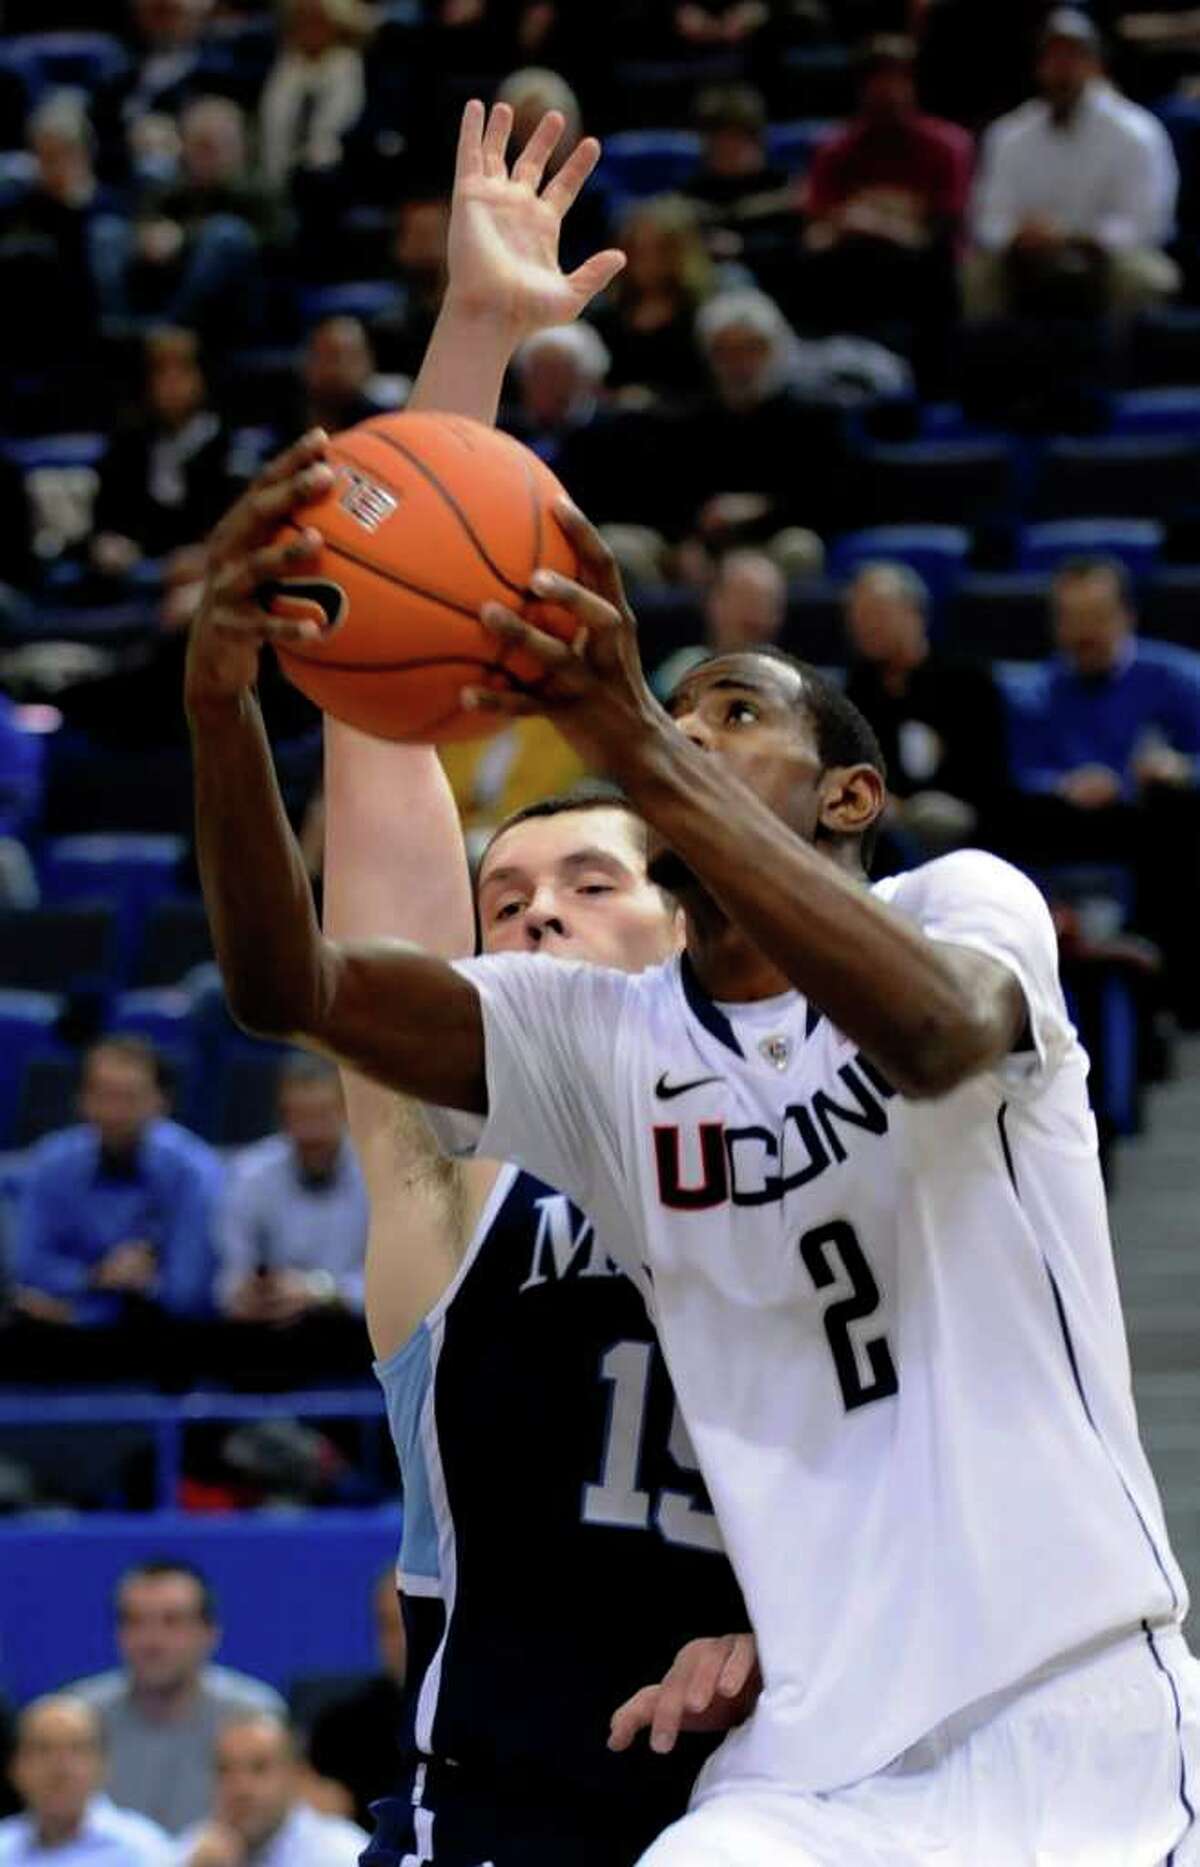 Connecticut's DeAndre Daniels goes up past Maine's Alasdair Fraser for a shot in the first half of an NCAA college basketball game in Hartford, Conn., Thursday, Nov. 17, 2011. (AP Photo/Bob Child)